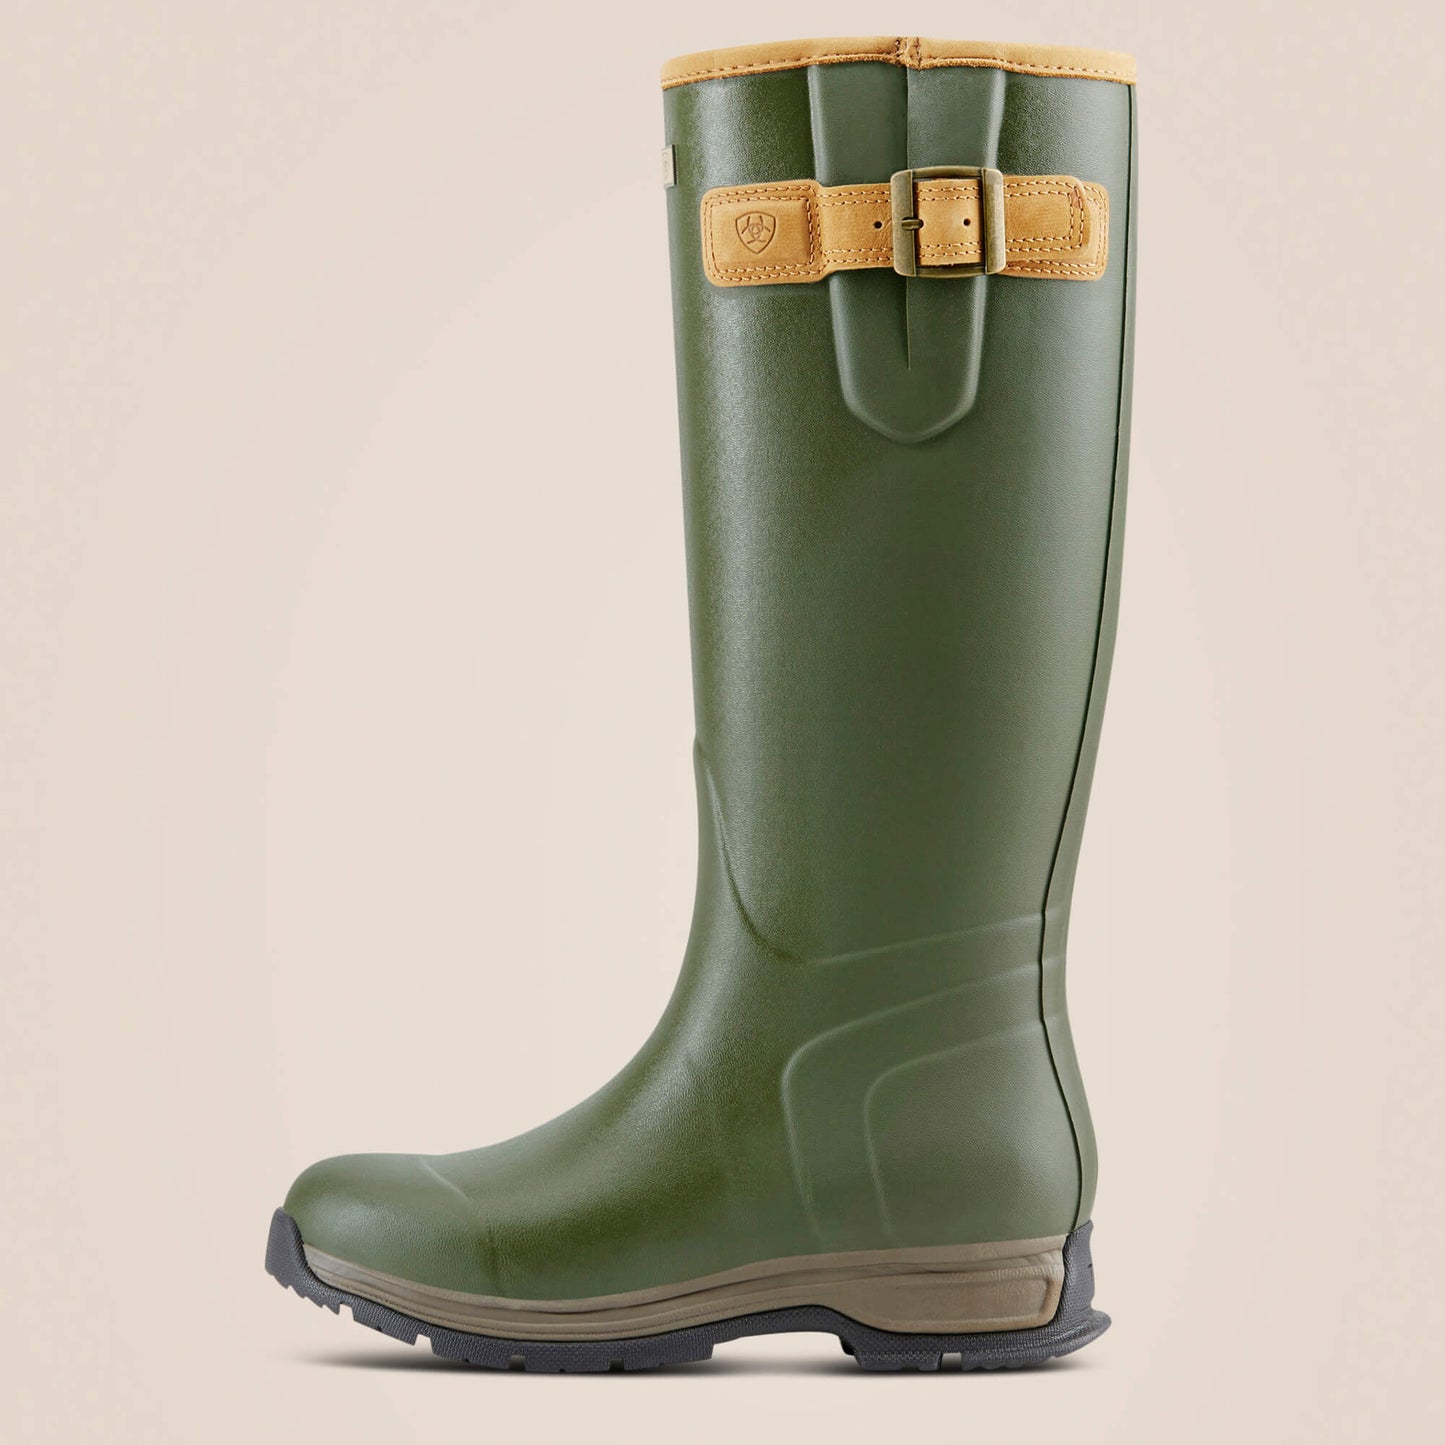 Ariat Burford Insulated Rubber Boot